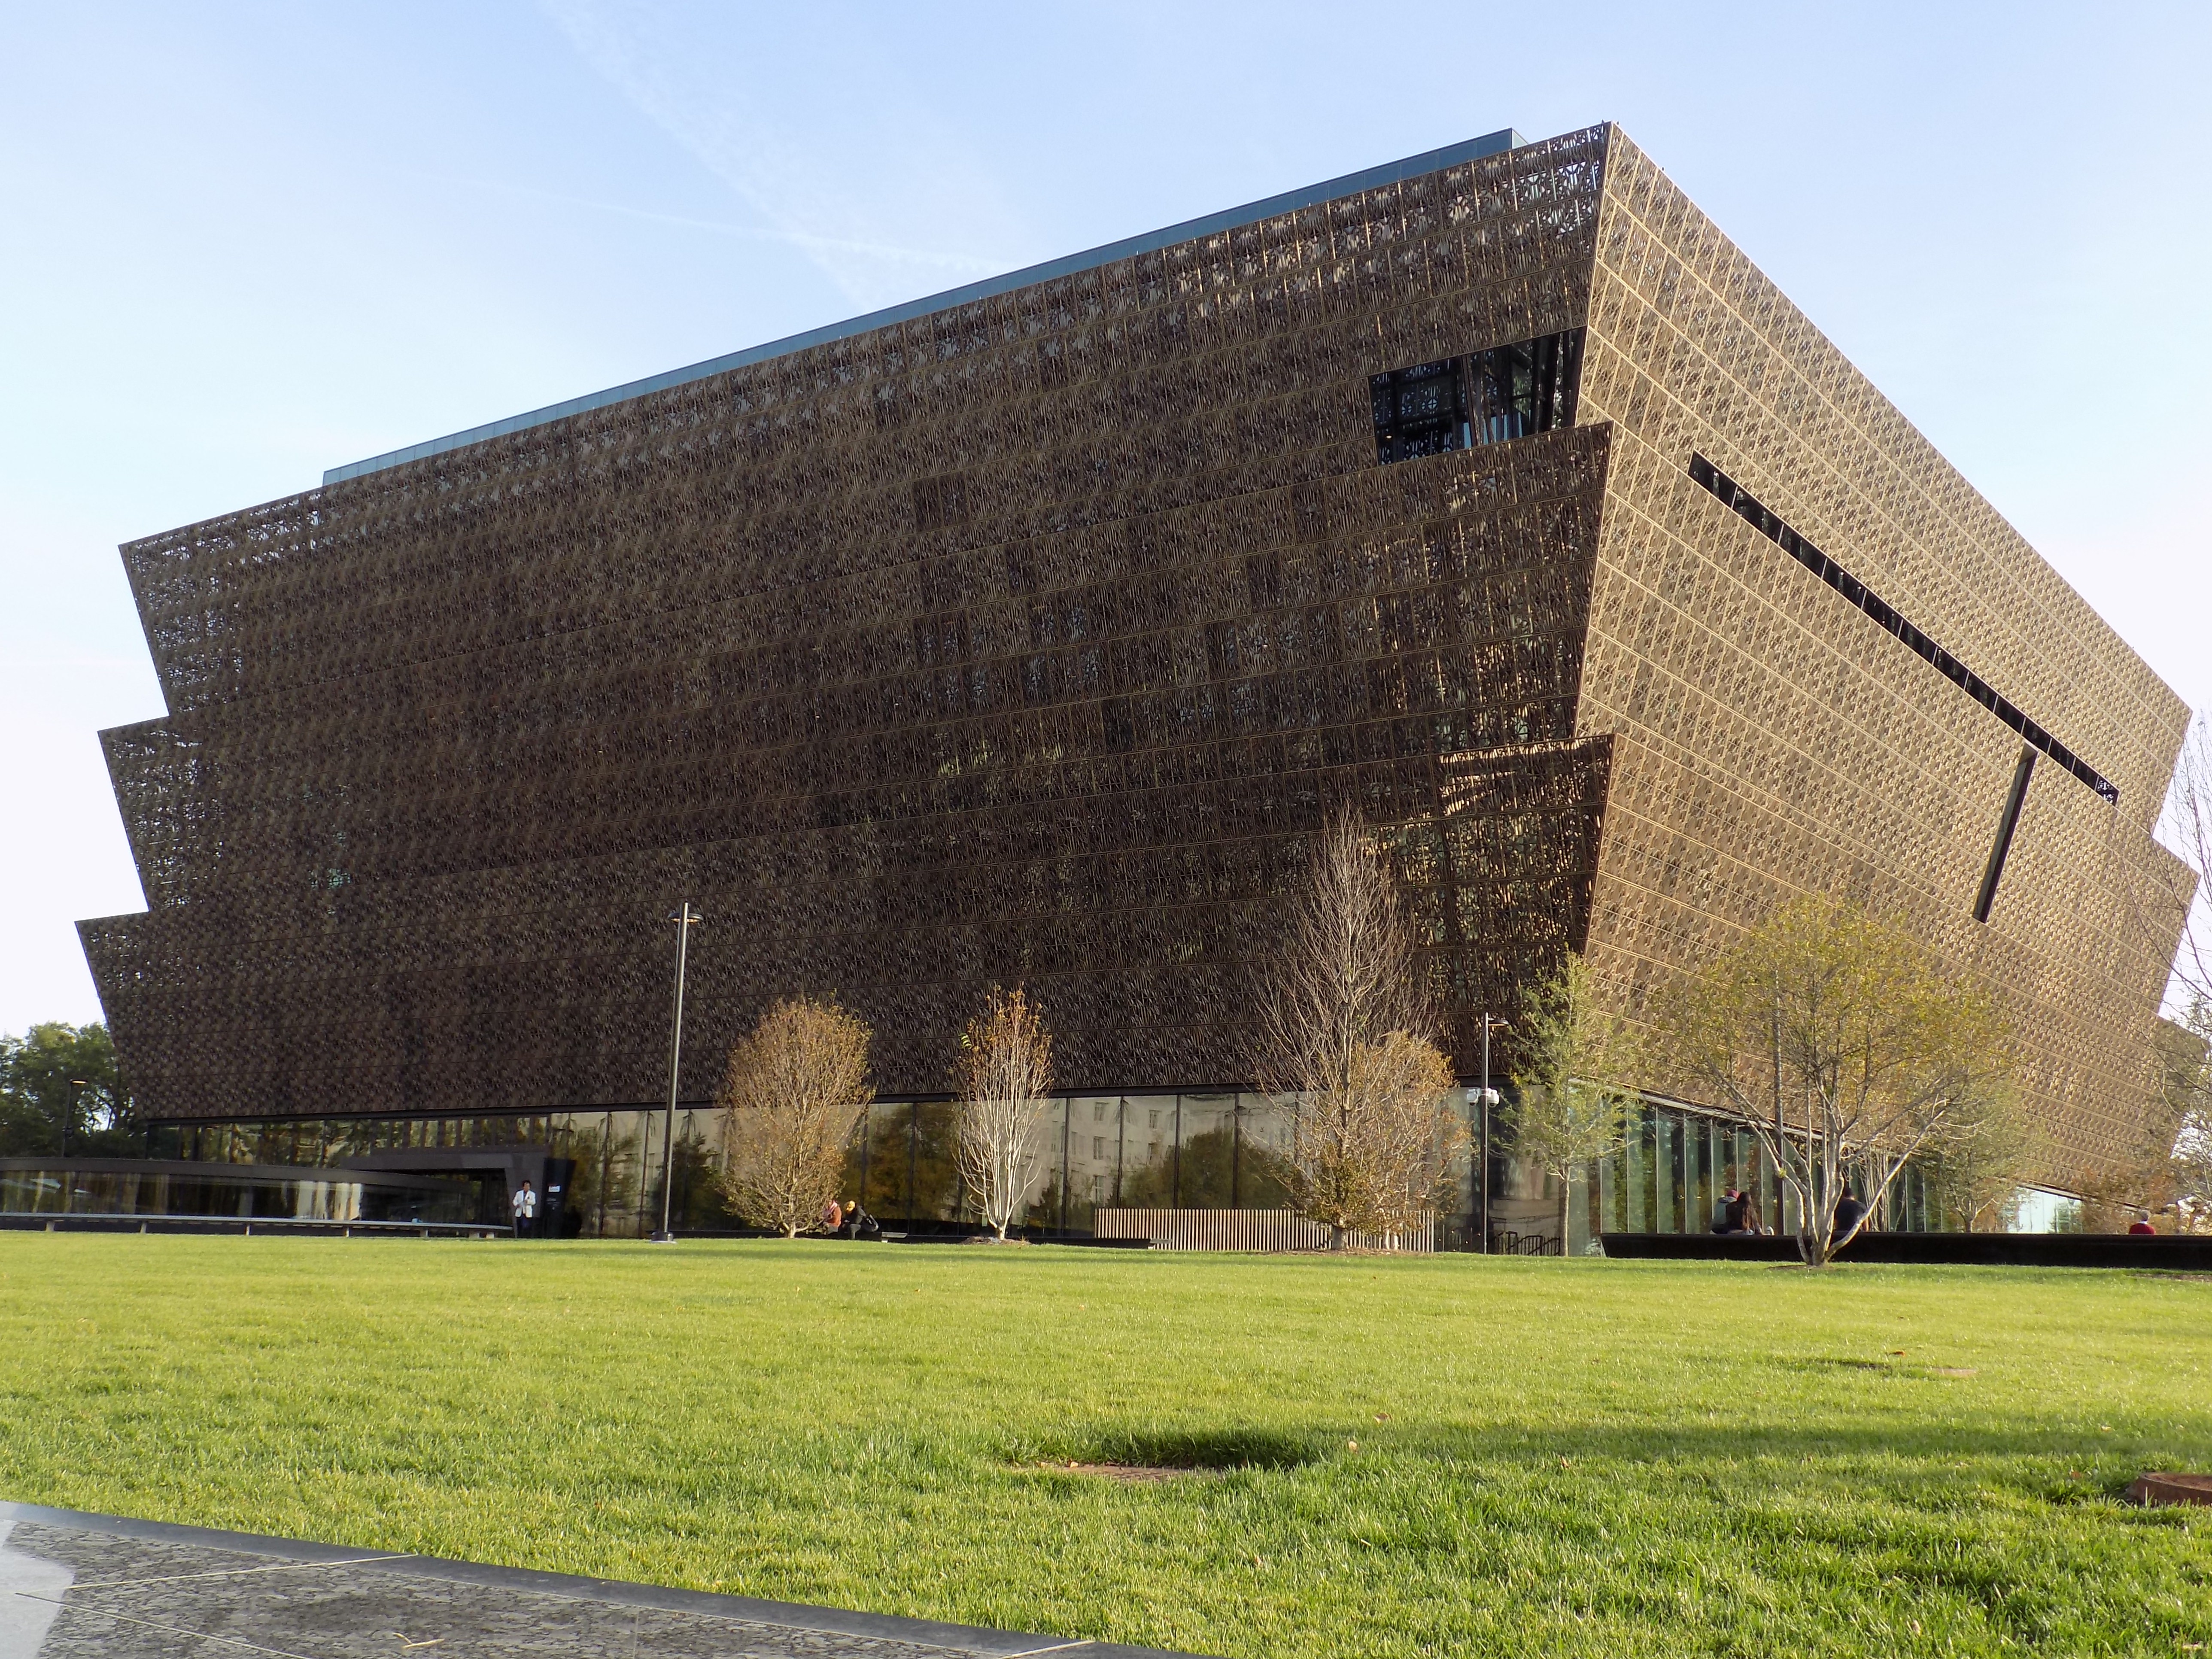 THE NATIONAL MUSEUM OF AFRICAN AMERICAN HISTORY AND CULTURE